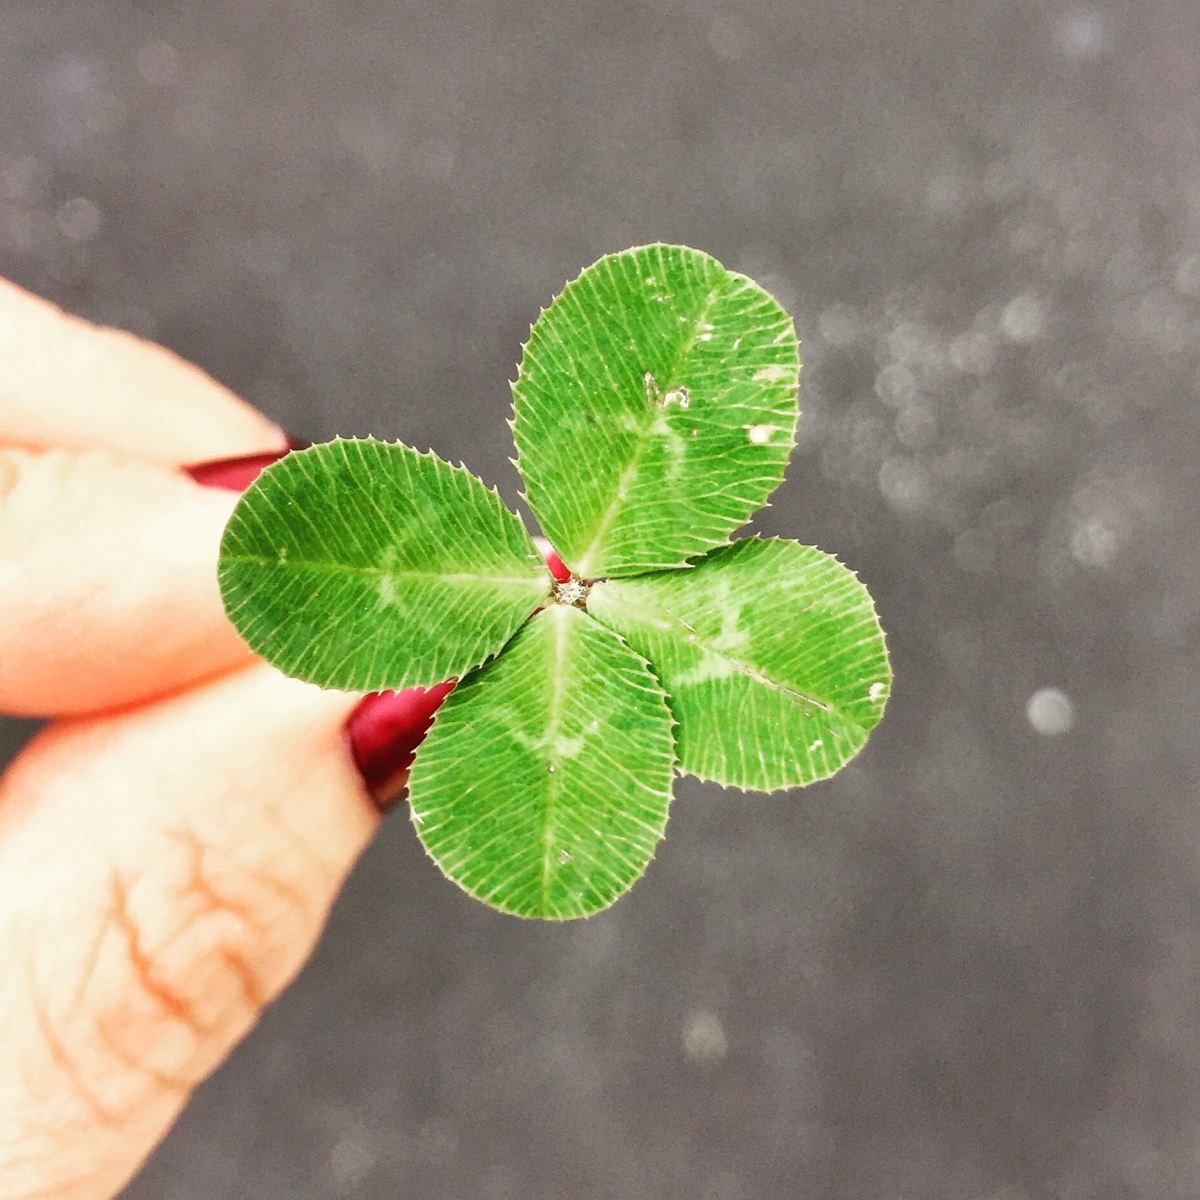 Picture of a four leaf clover depicting luck